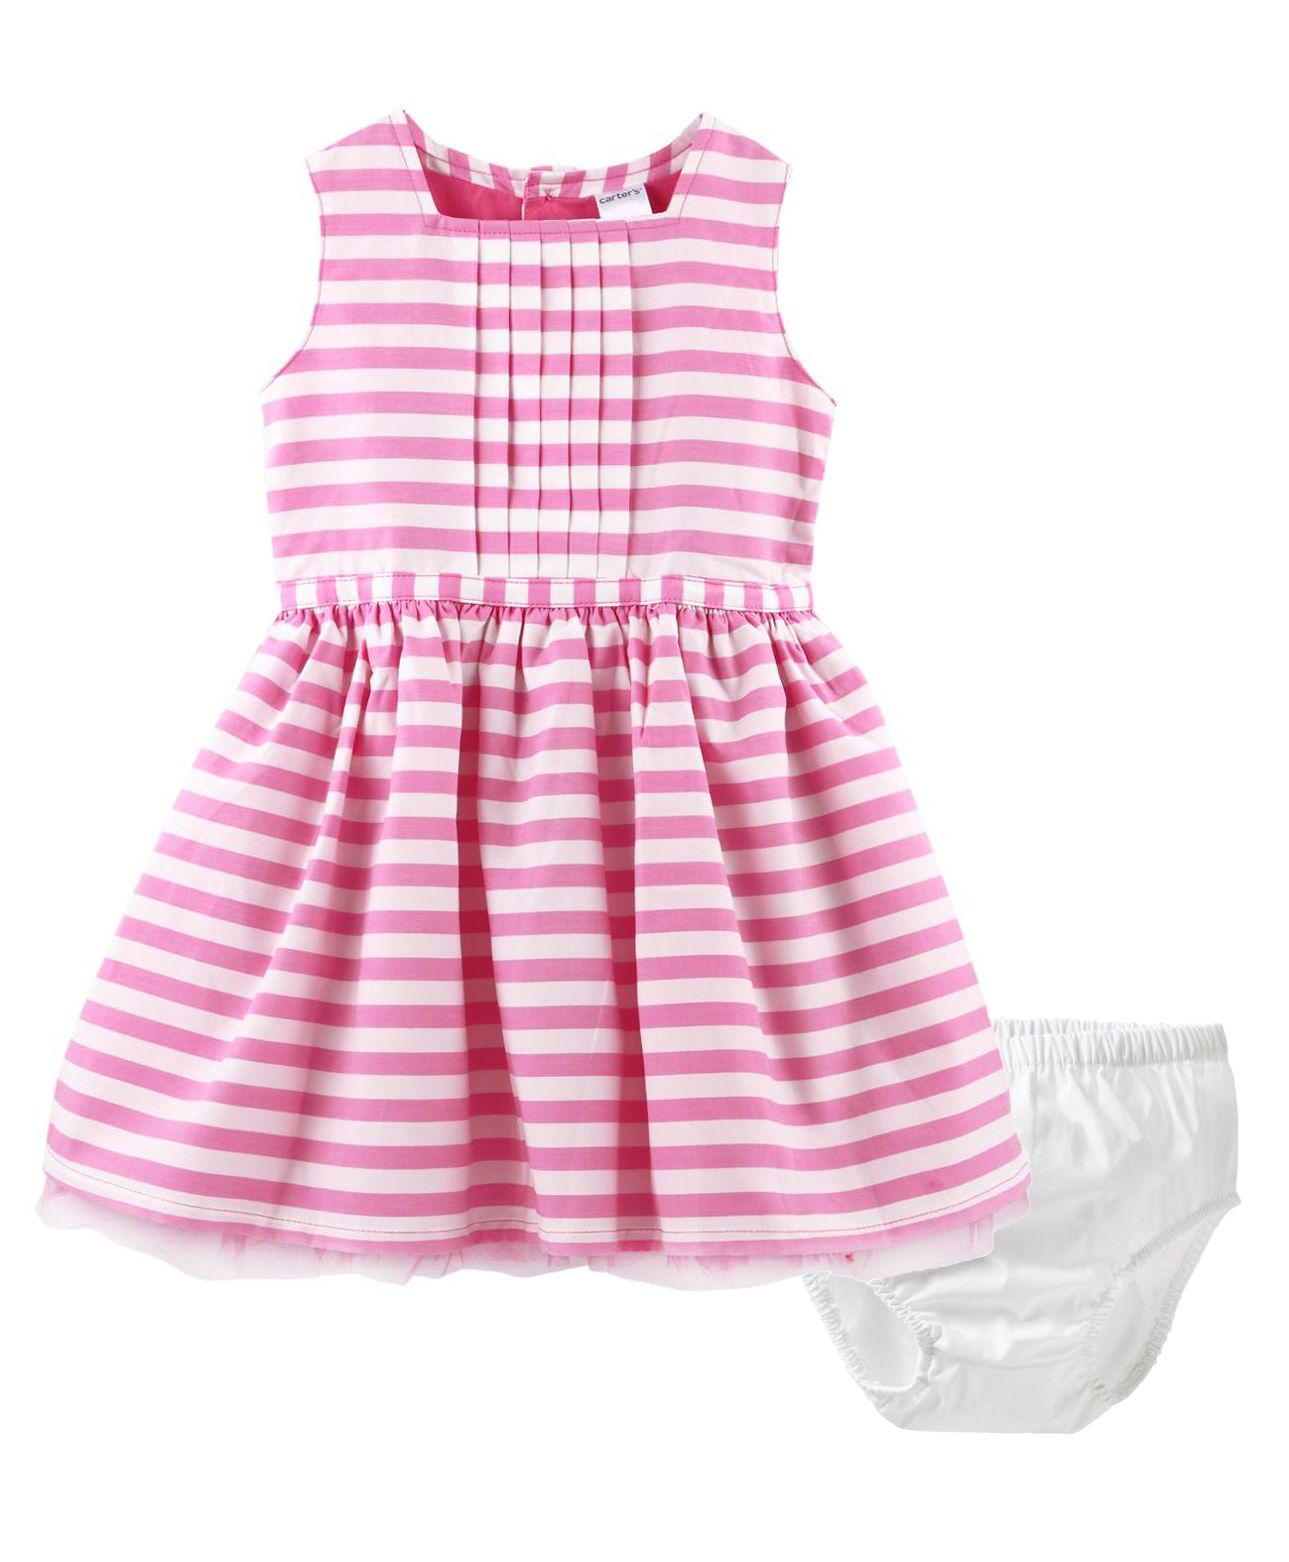 Buy Carter's Striped Sateen Dress   Pink for Girls  Months Online in ...